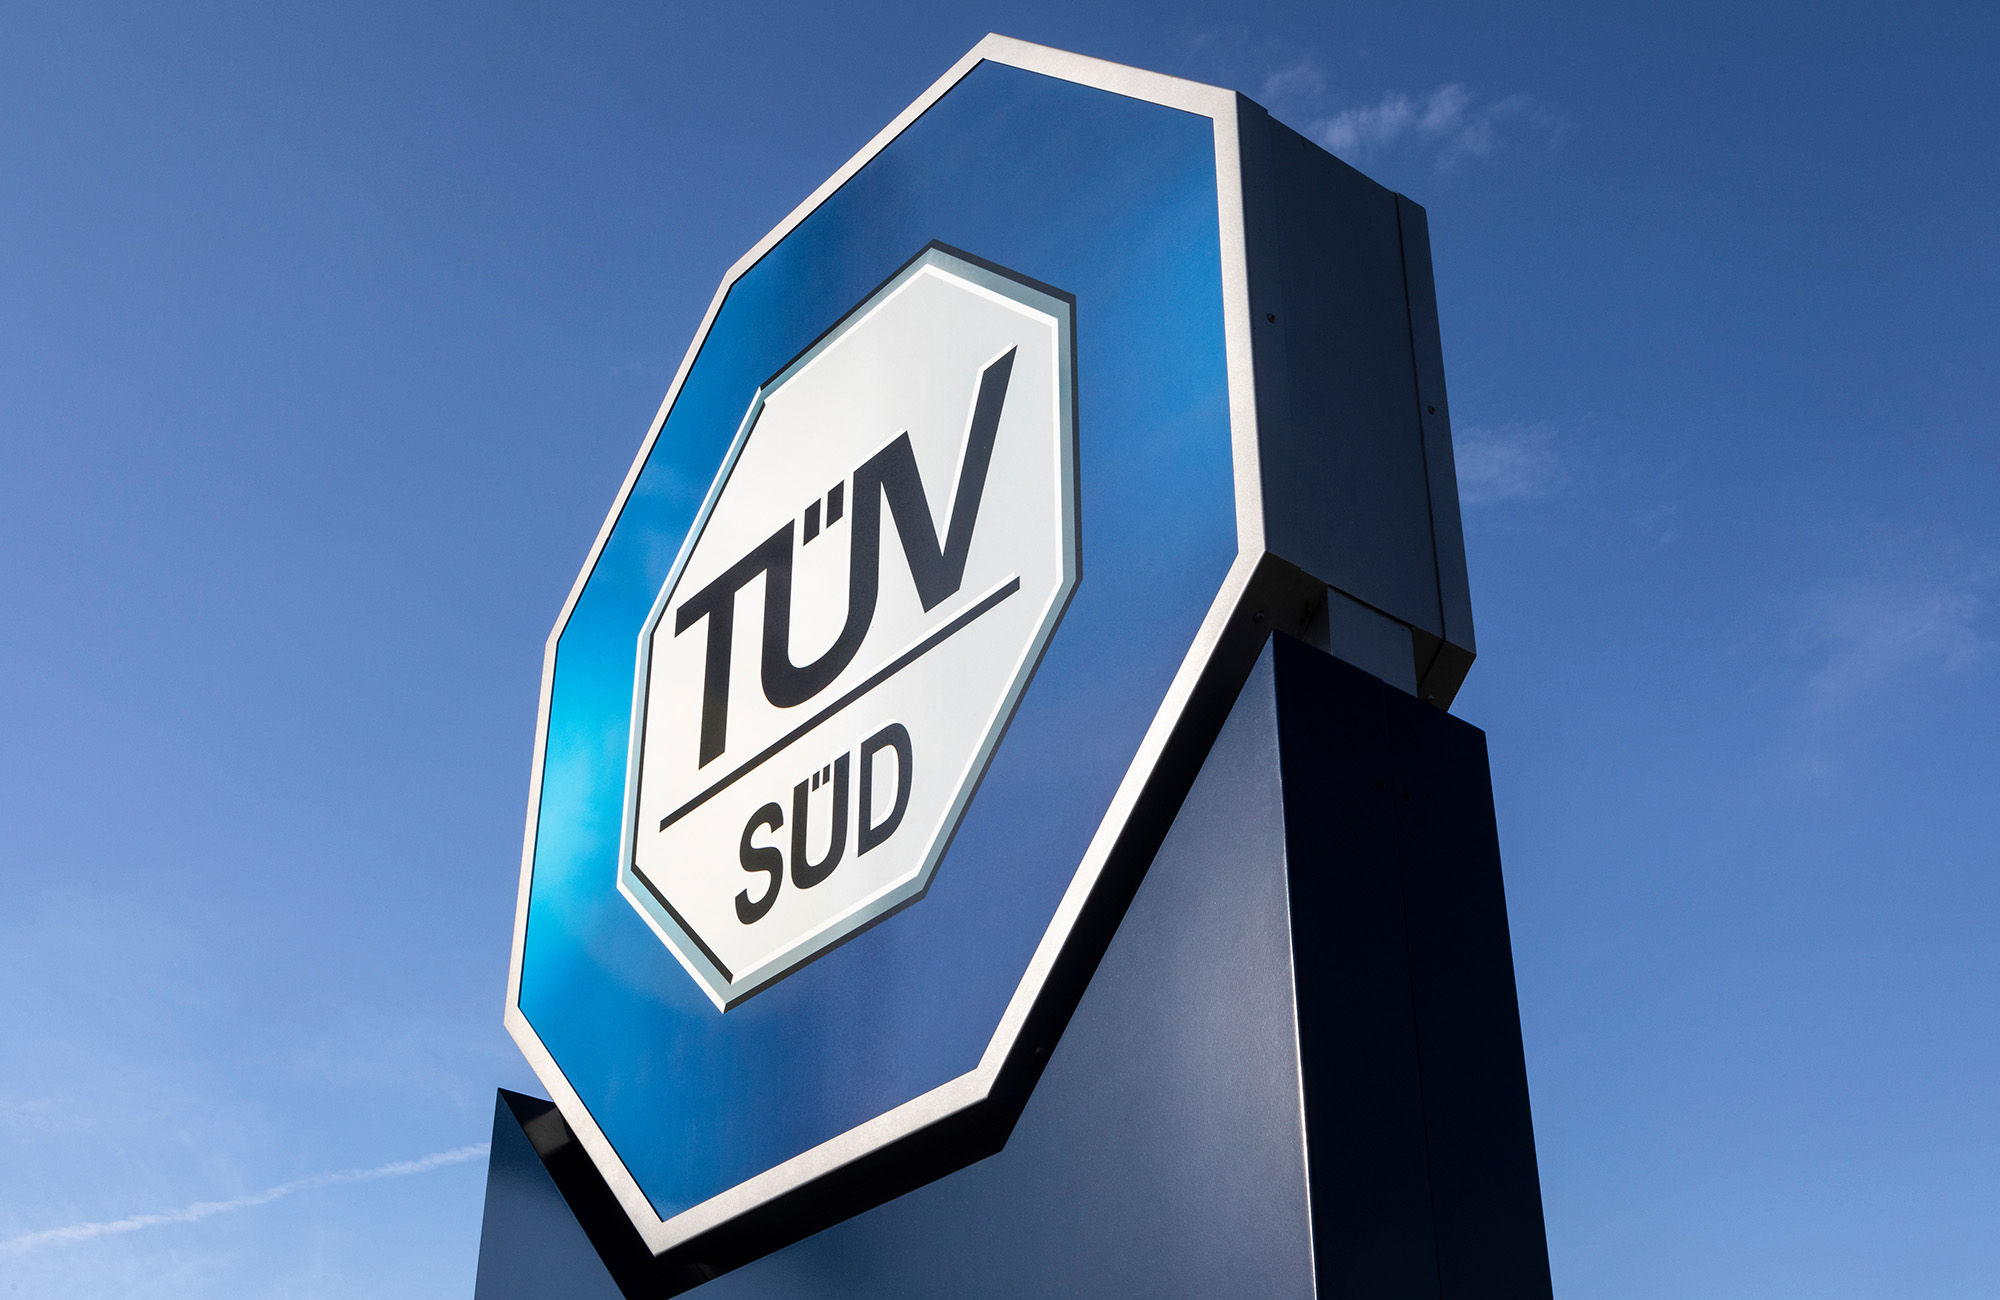 tuev sued certifications iso standards